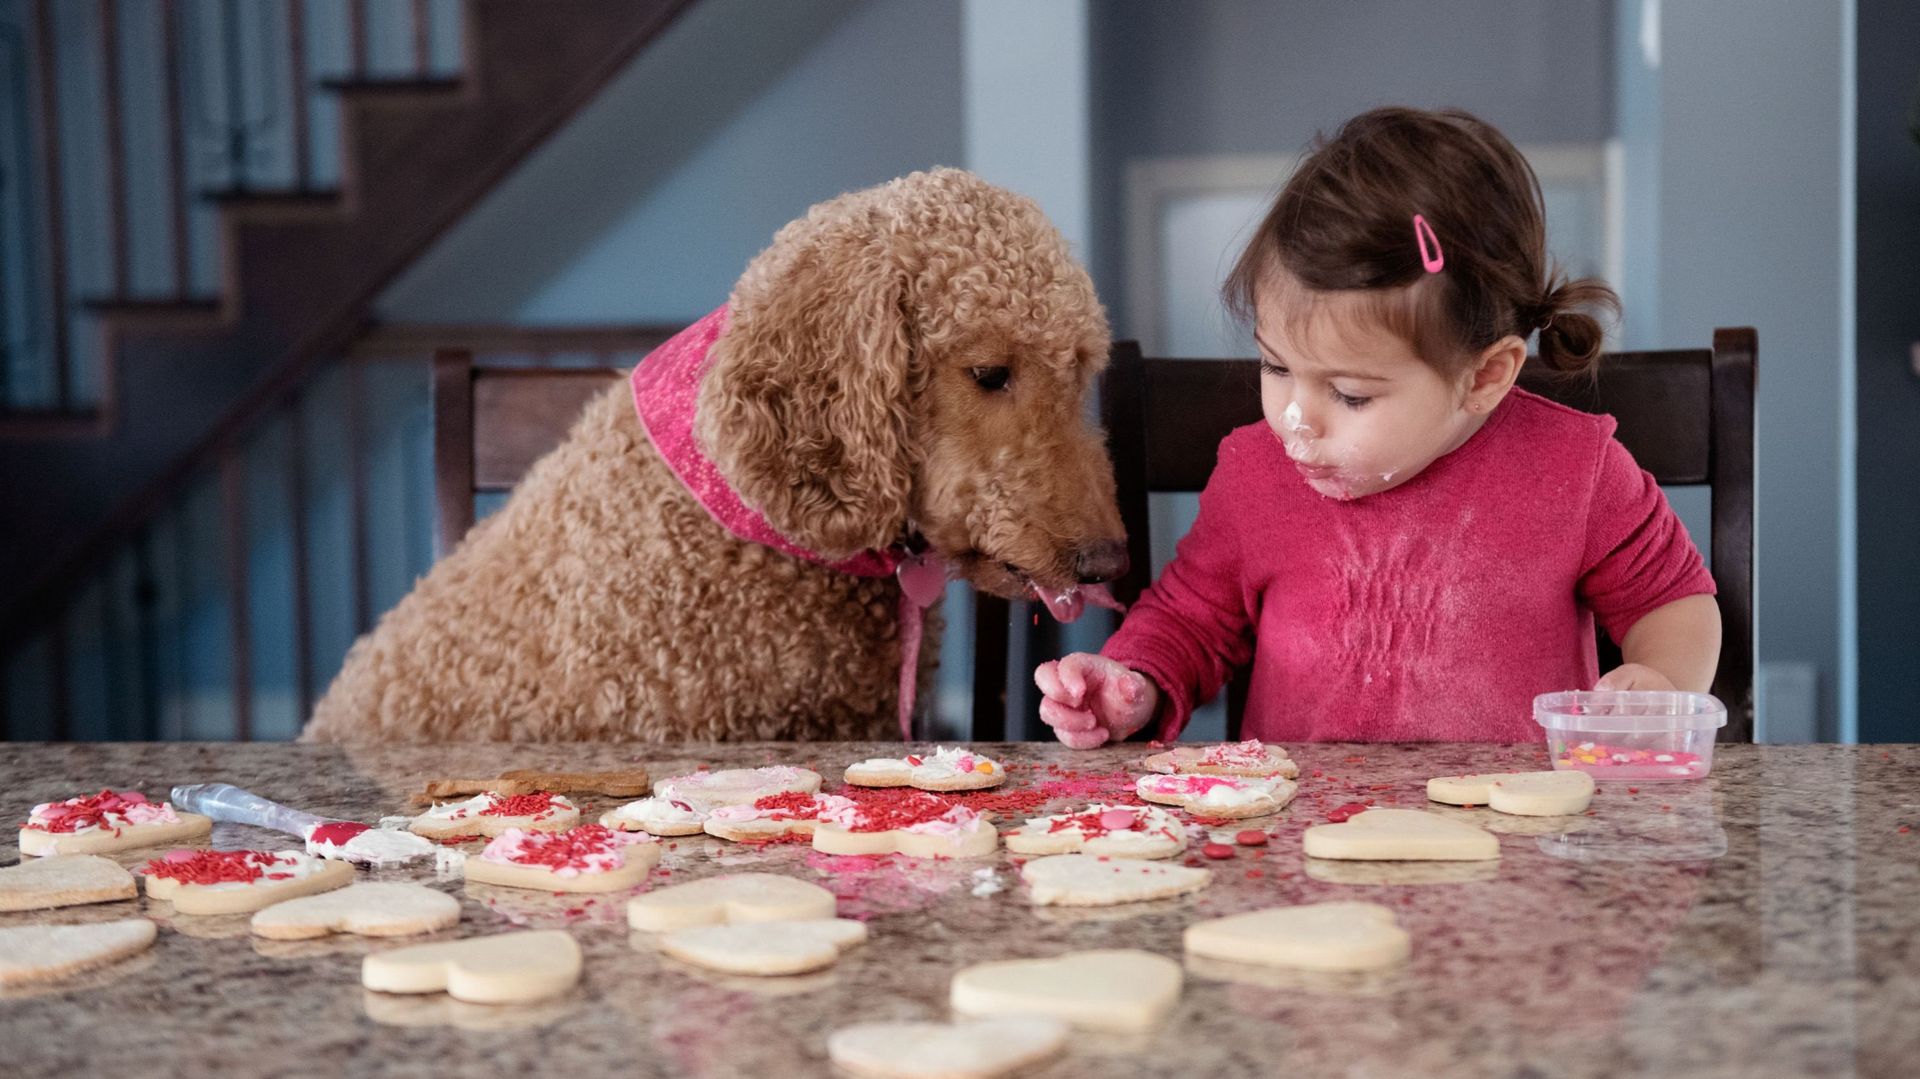 Little girl tastes heart shaped cookies with her dog.